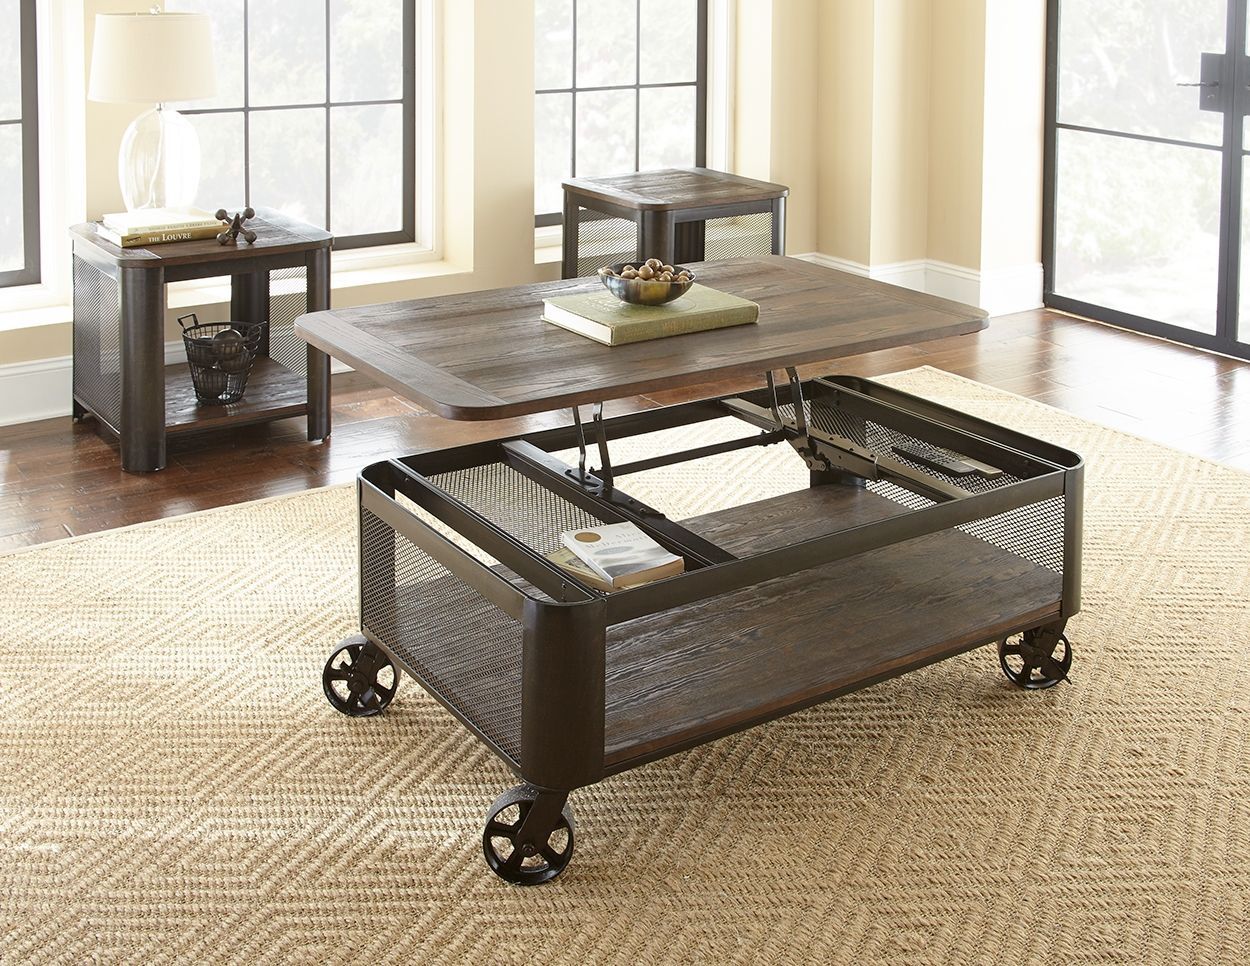 Clint Lift Top Table With Casters | Coffee Table With Wheels, Coffee In Coffee Tables With Casters (View 12 of 15)